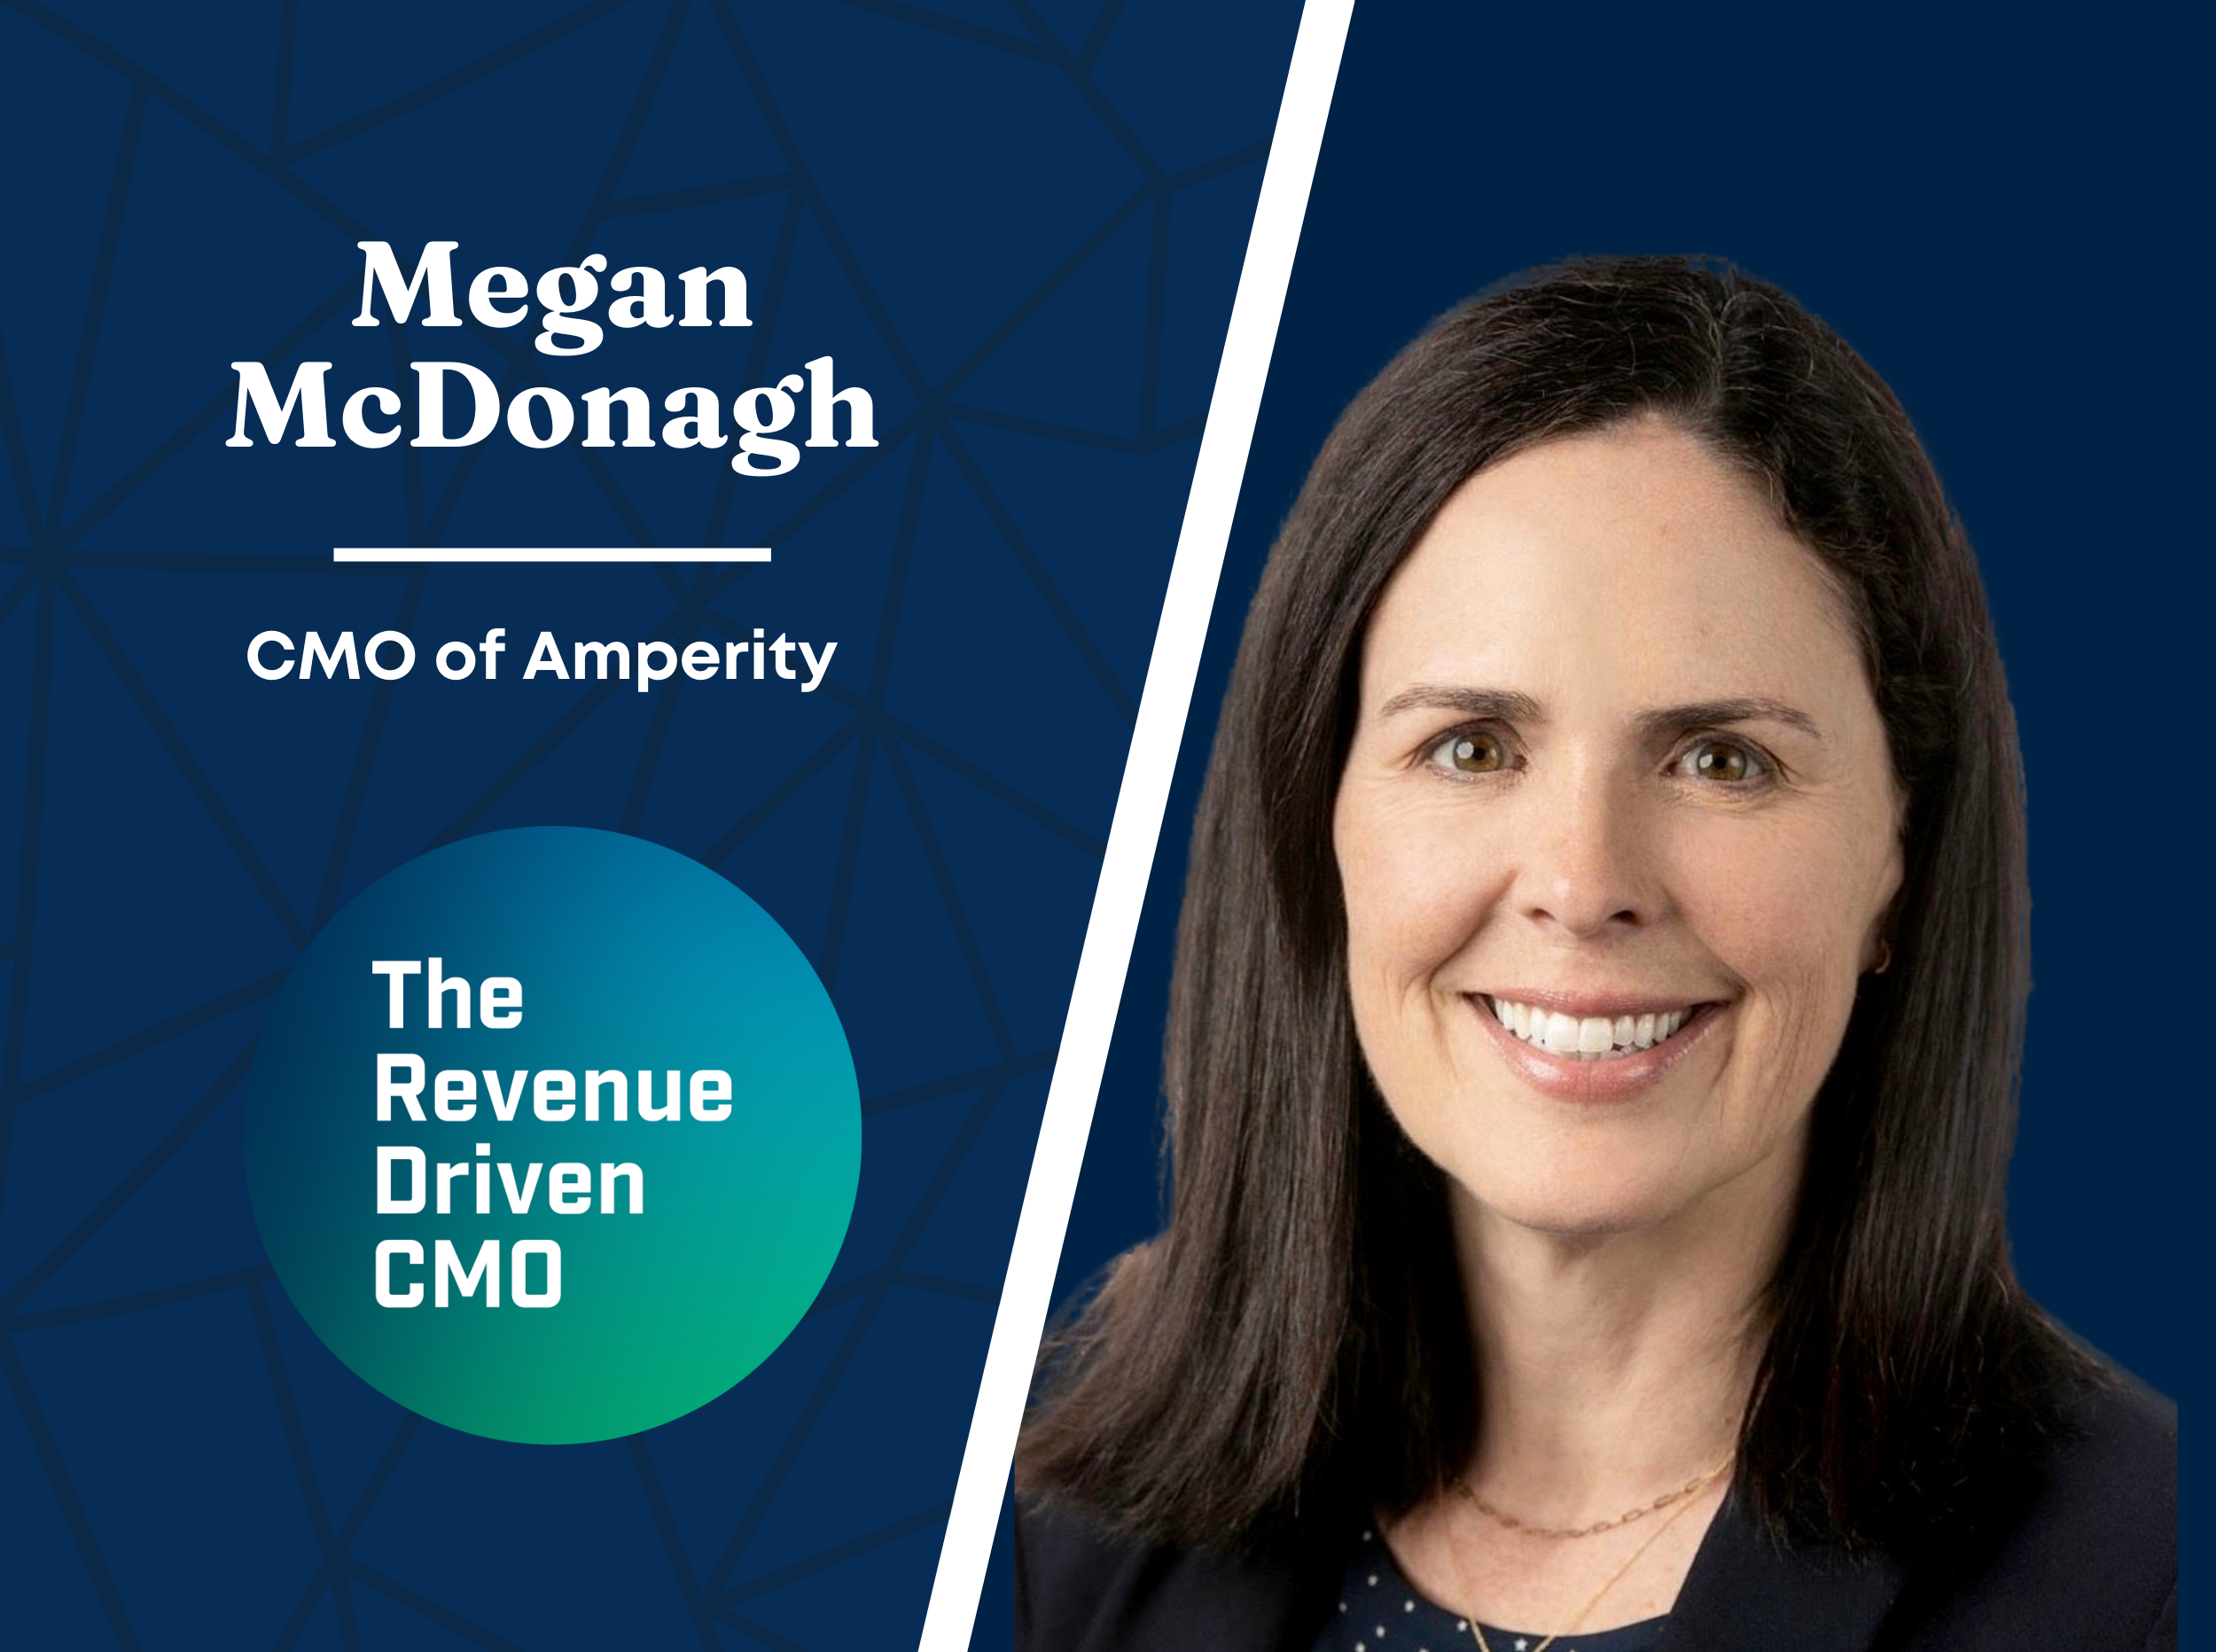 Getting back to the basics of marketing with Megan McDonagh